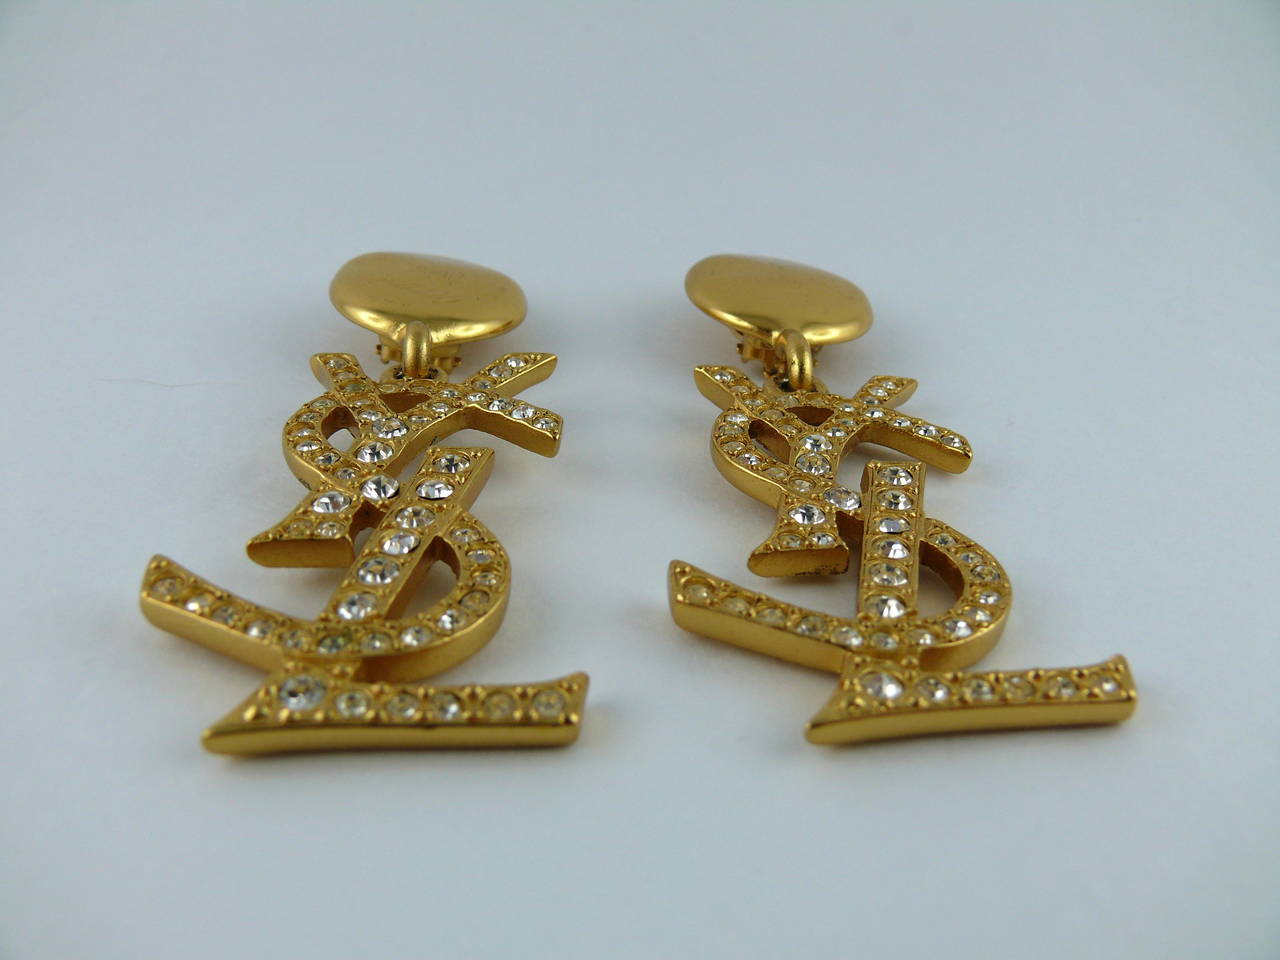 YVES SAINT LAURENT massive vintage gold tone and crystal iconic logo dangling earrings (clip on).

Rare and collectable item !
As seen on Samantha Jones in SATC 2.

Marked YSL Made in France.

Note
As a buyer, you are fully responsible for